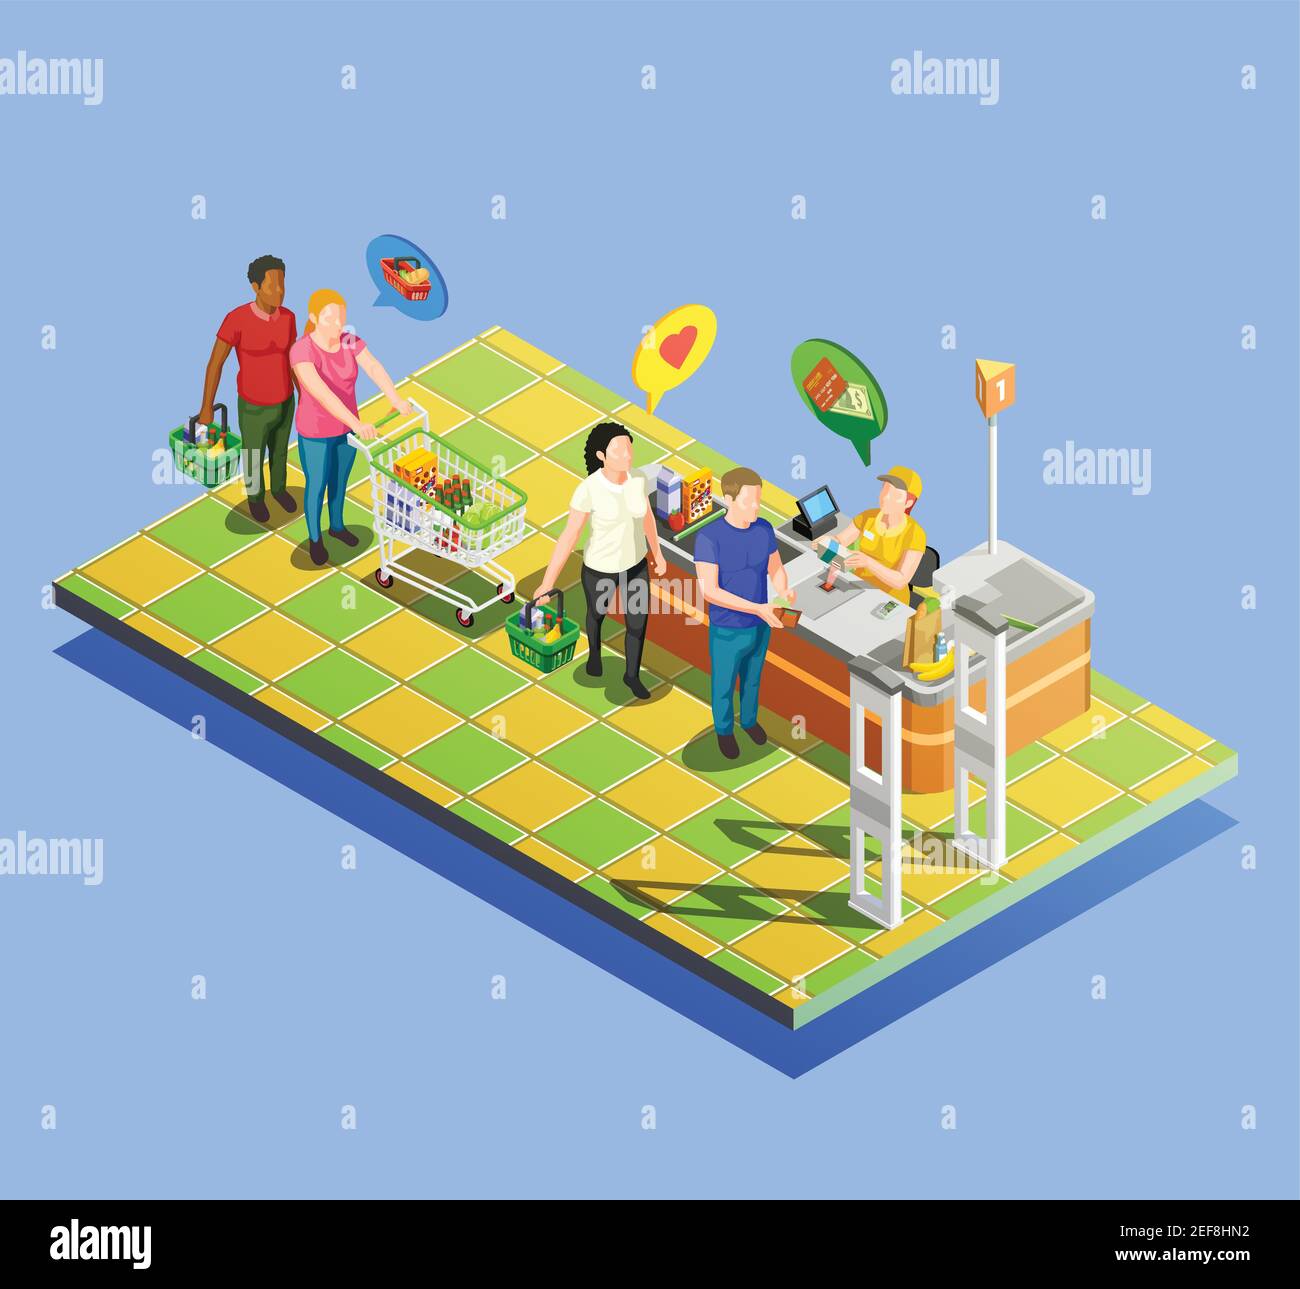 Isometric people shopping line composition of marketer human characters with trolleys carts and flat thought bubbles vector illustration Stock Vector